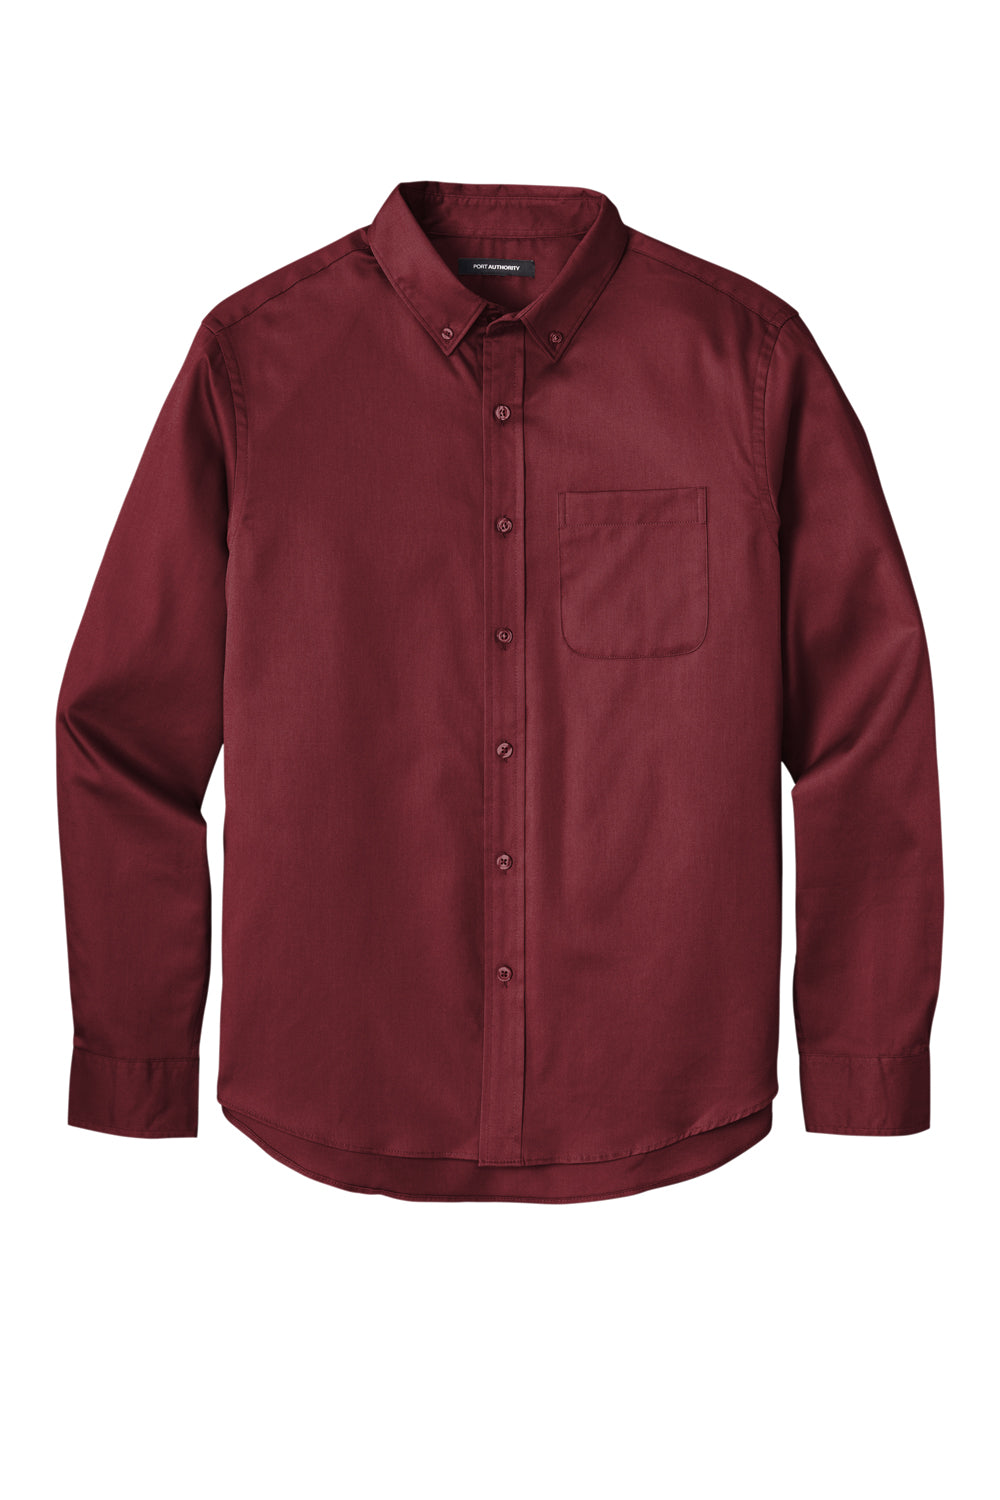 Port Authority W808 SuperPro Wrinkle Resistant React Long Sleeve Button Down Shirt w/ Pocket Burgundy Flat Front